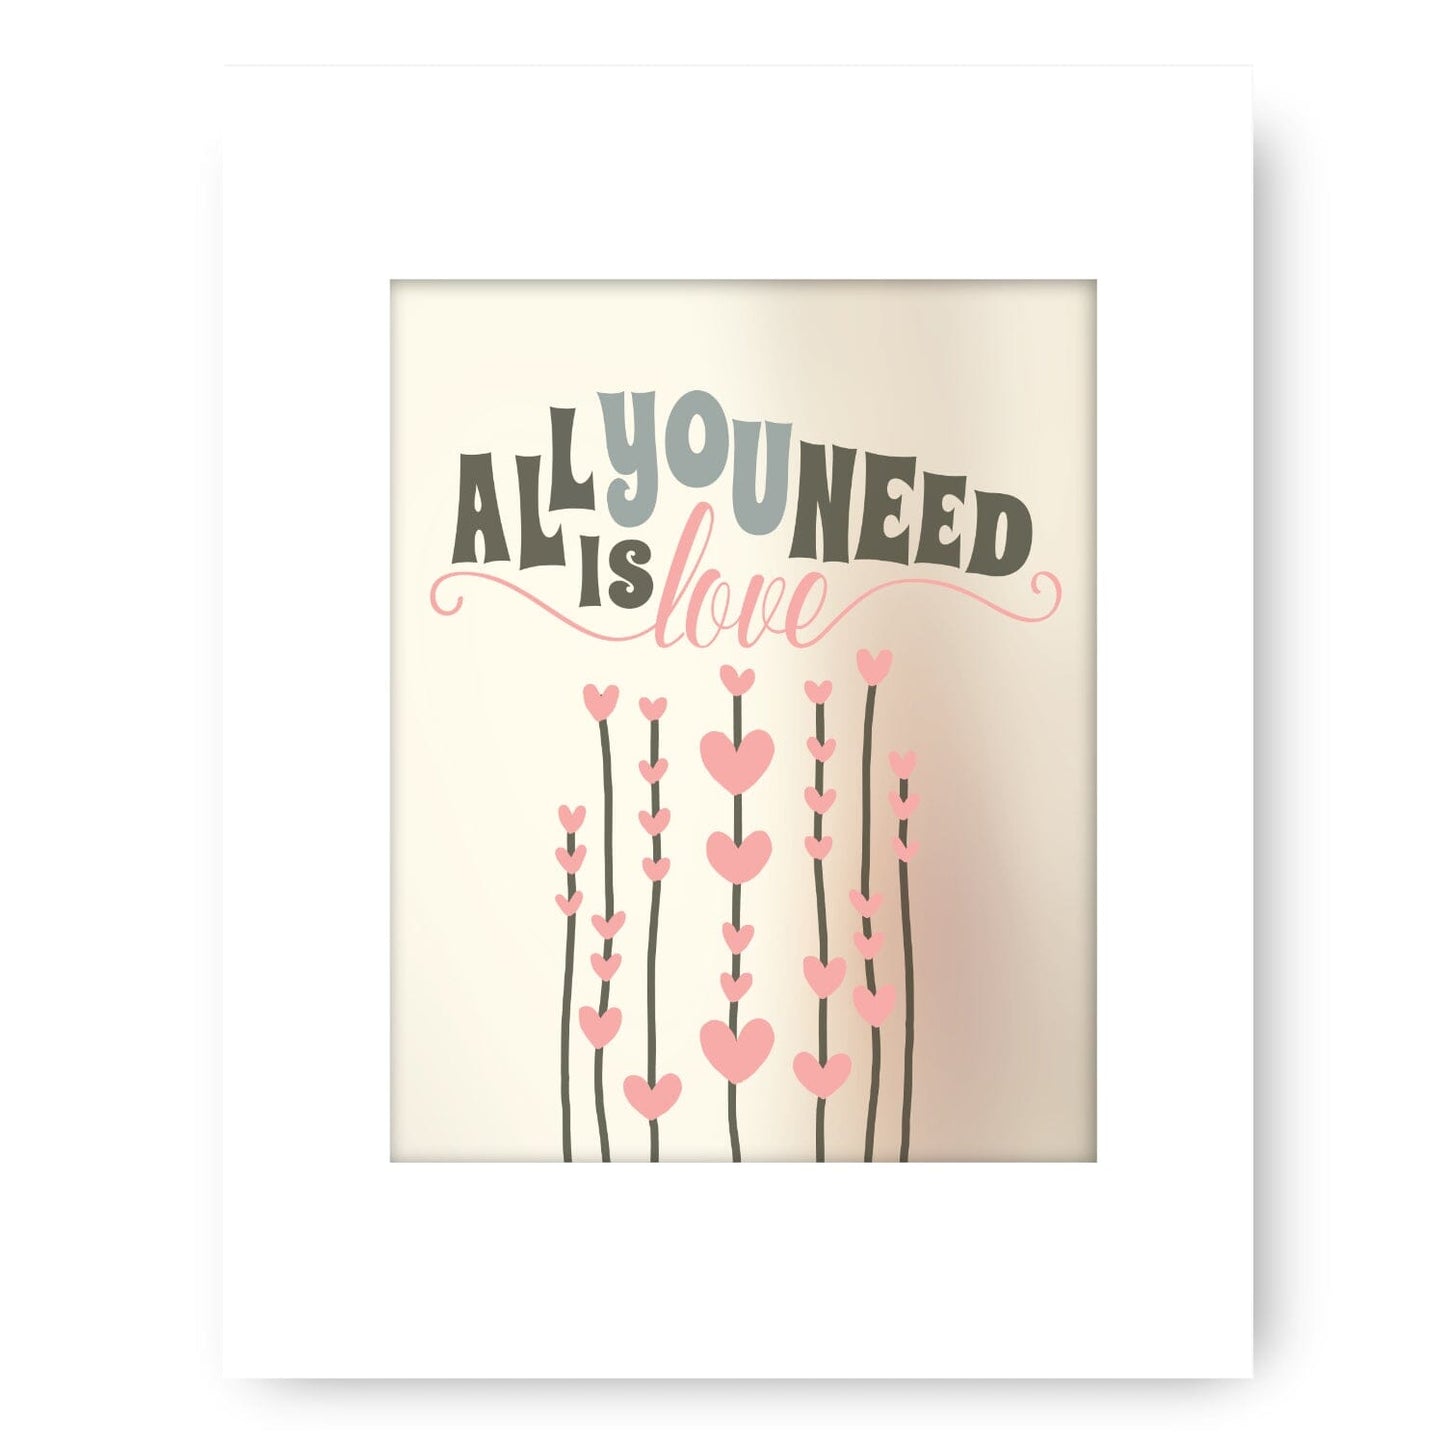 All You Need is Love by the Beatles - Song Lyric Art Print Song Lyrics Art Song Lyrics Art 8x10 White Matted Print 